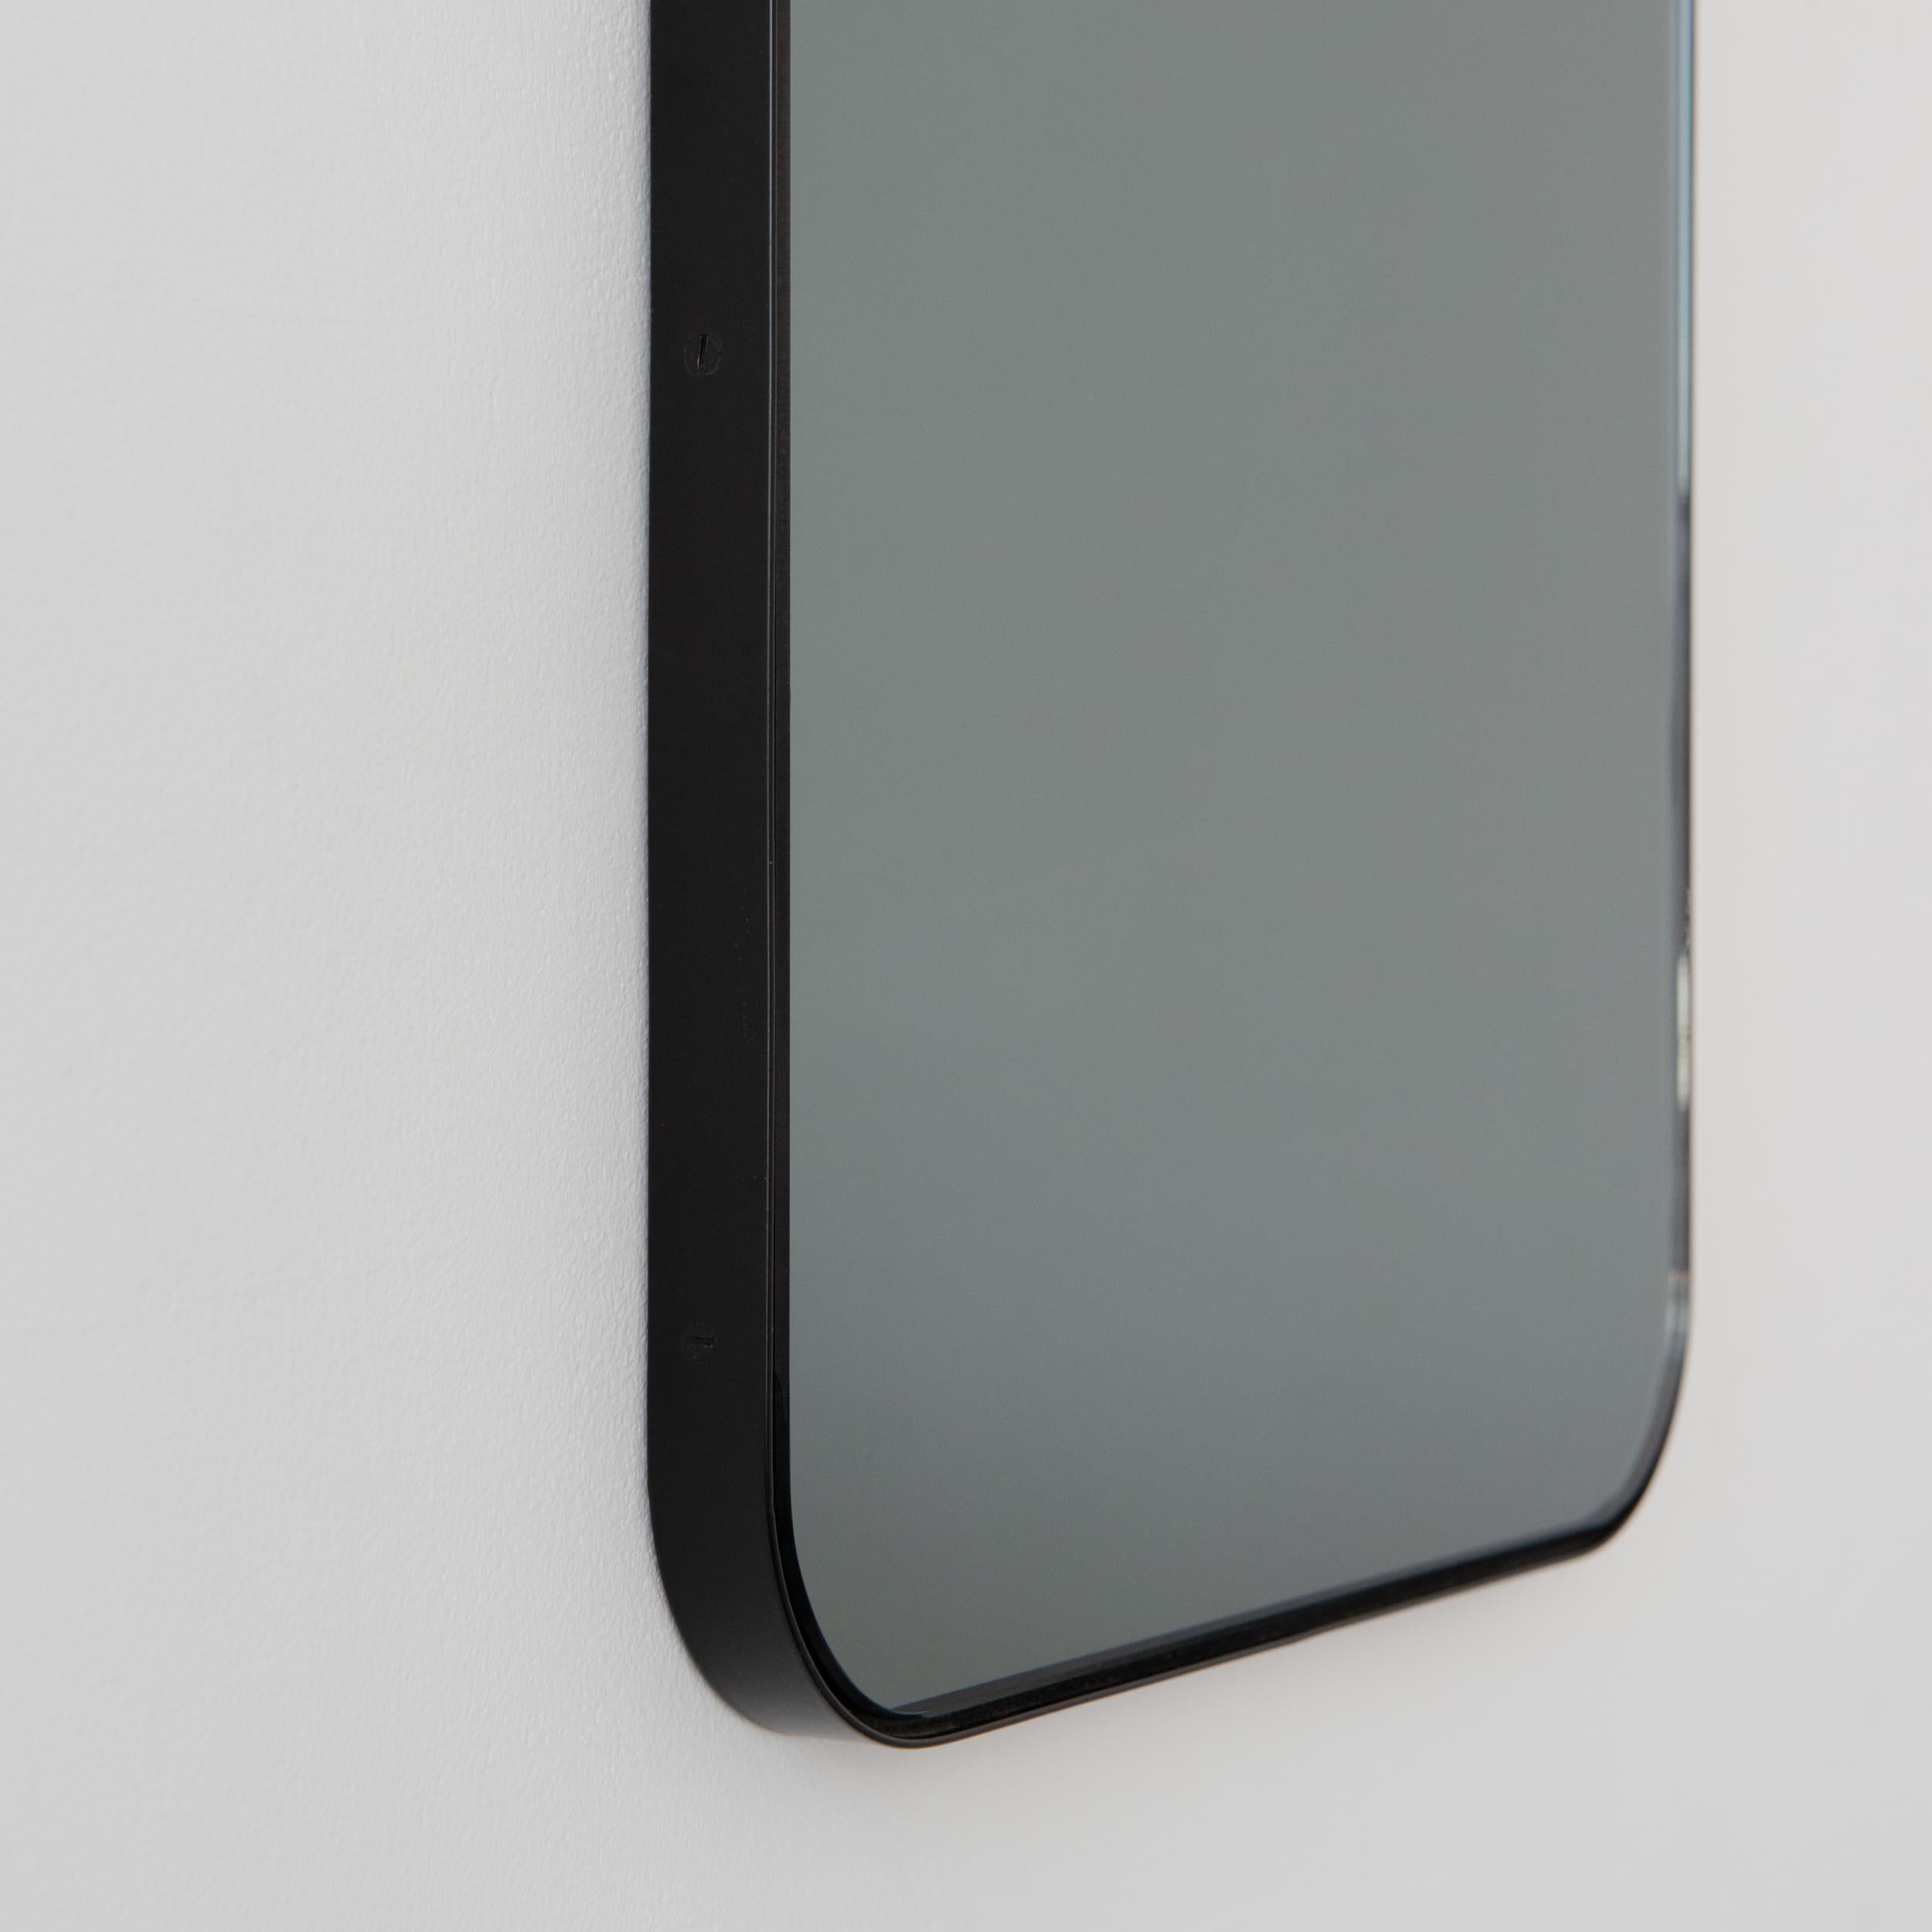 Quadris Black Tinted Rectangular Mirror with a Black Frame, Medium In New Condition For Sale In London, GB